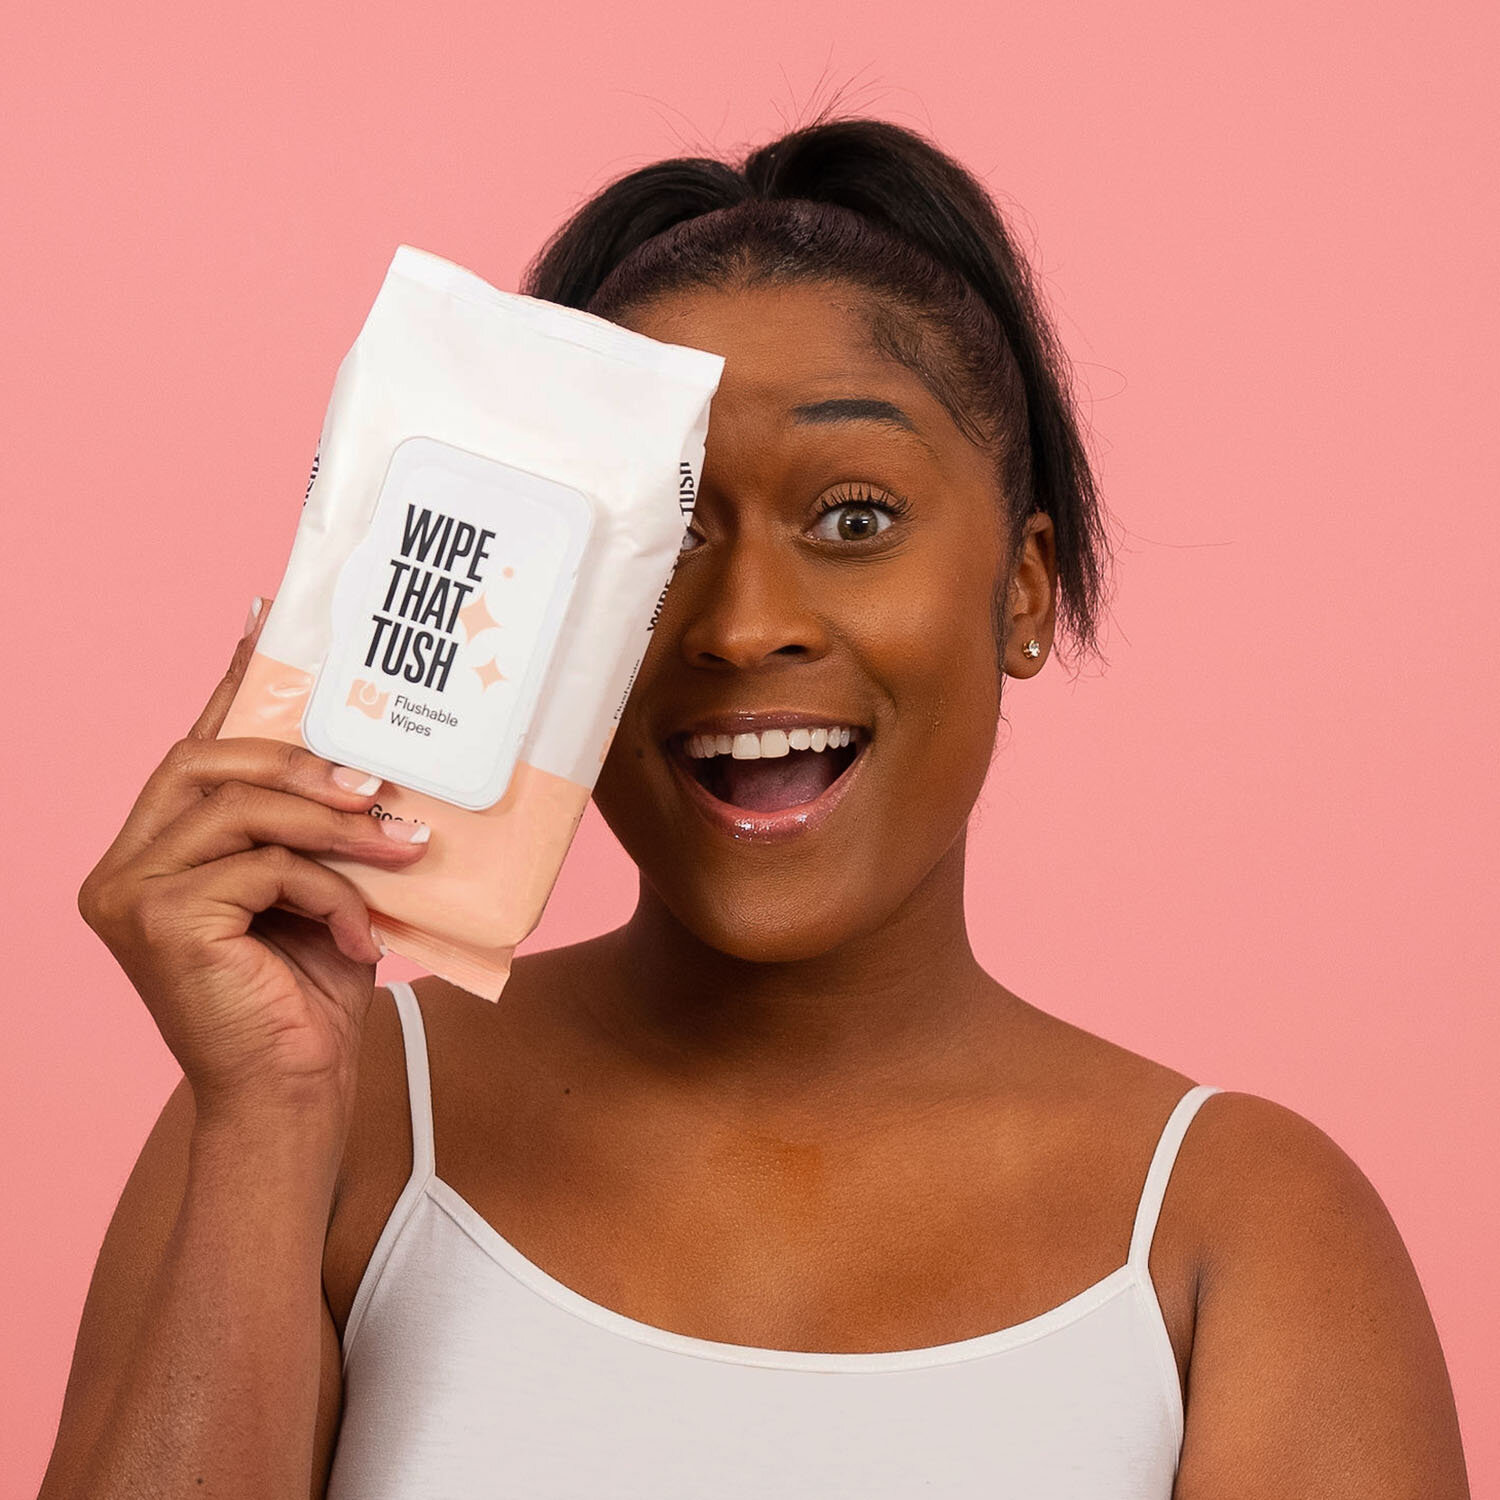 Upgrade your bathroom game with Wipe That Tush flushable wipes! 😍 Say goodbye to ordinary toilet paper and hello to a gentler, more refreshing clean. ✨ Try it now and share your experience below! 👇 #WipeThatTush #FlushableWipes #CleanBathroom